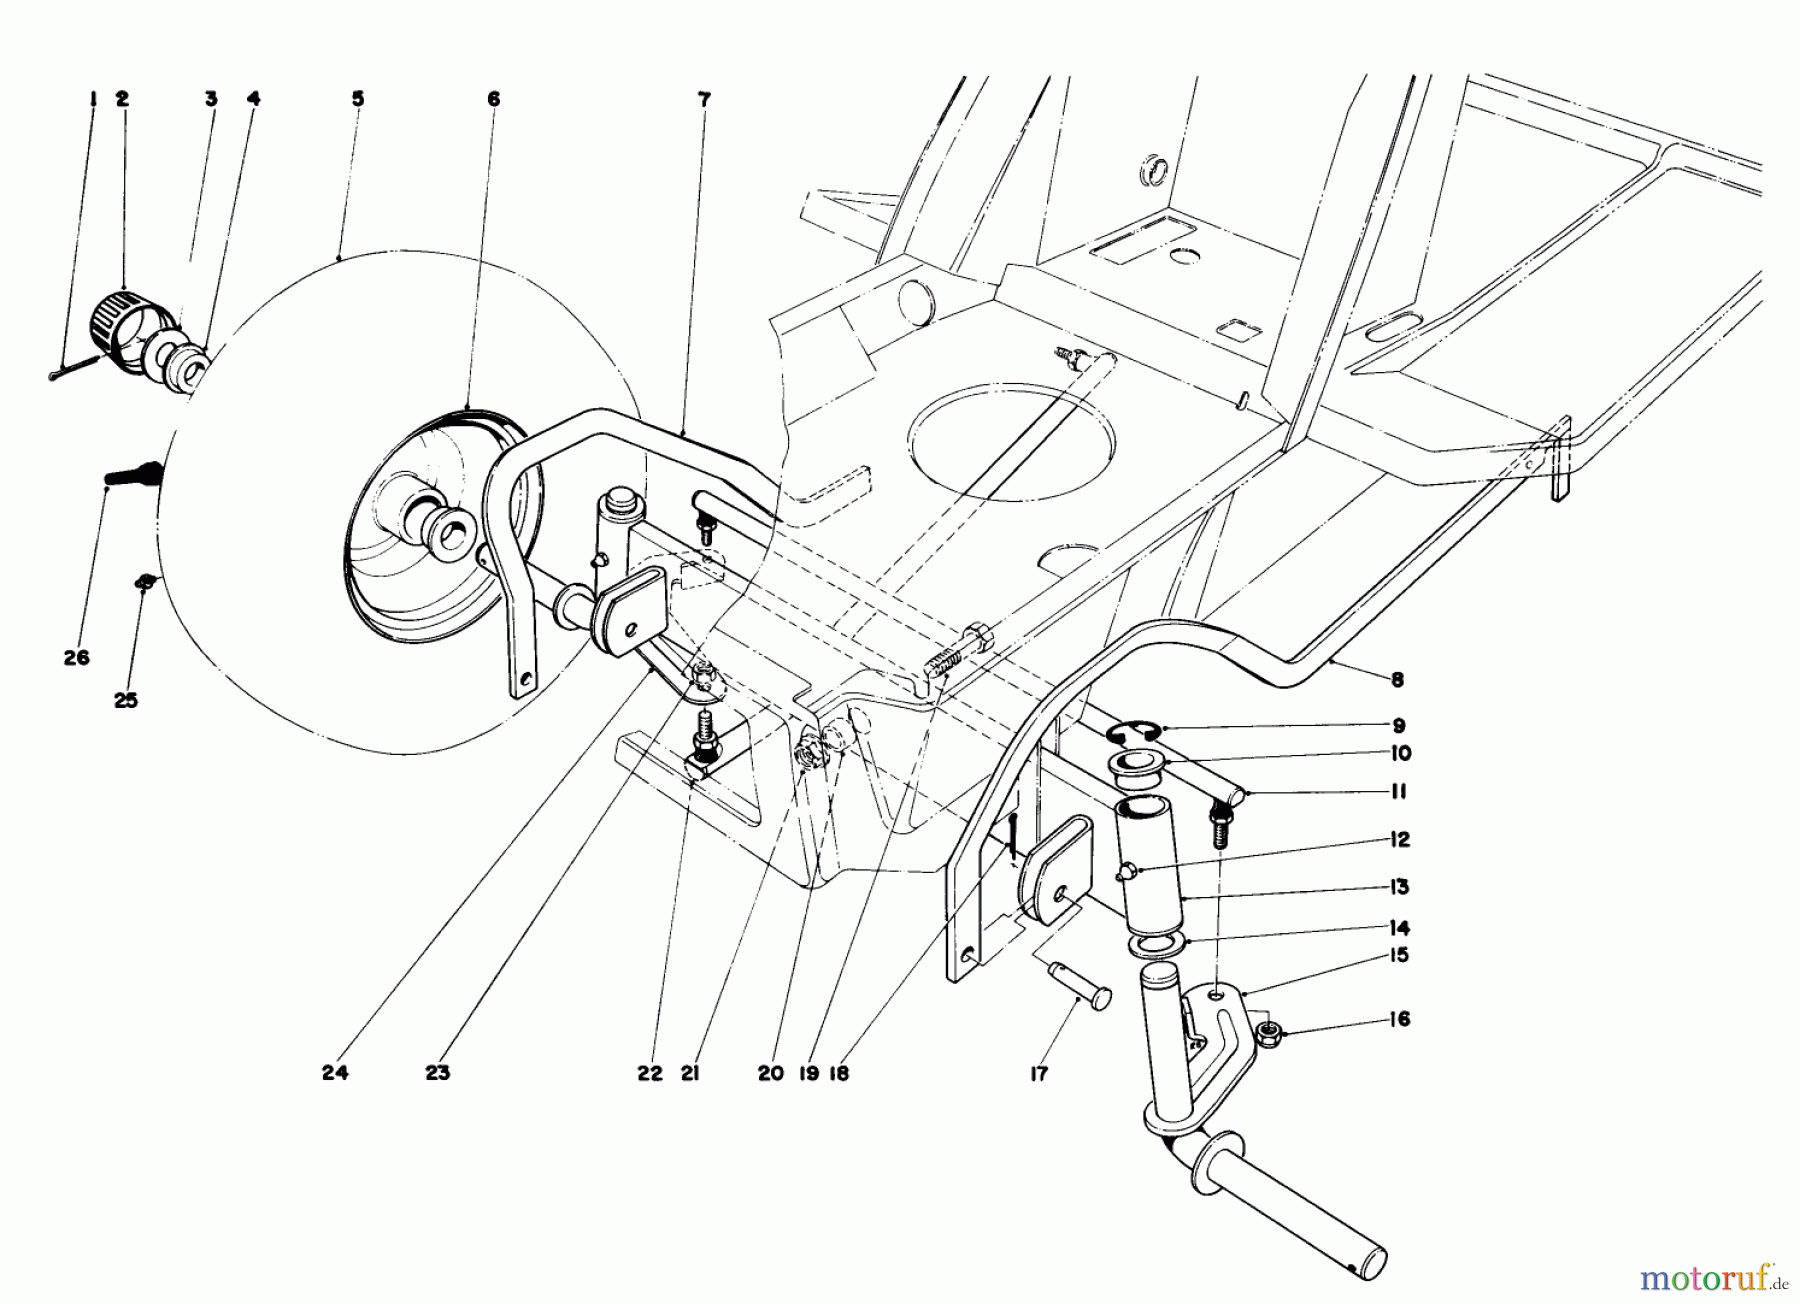  Toro Neu Mowers, Lawn & Garden Tractor Seite 1 57357 (11-44) - Toro 11-44 Lawn Tractor, 1981 (1000001-1999999) FRONT AXLE ASSEMBLY